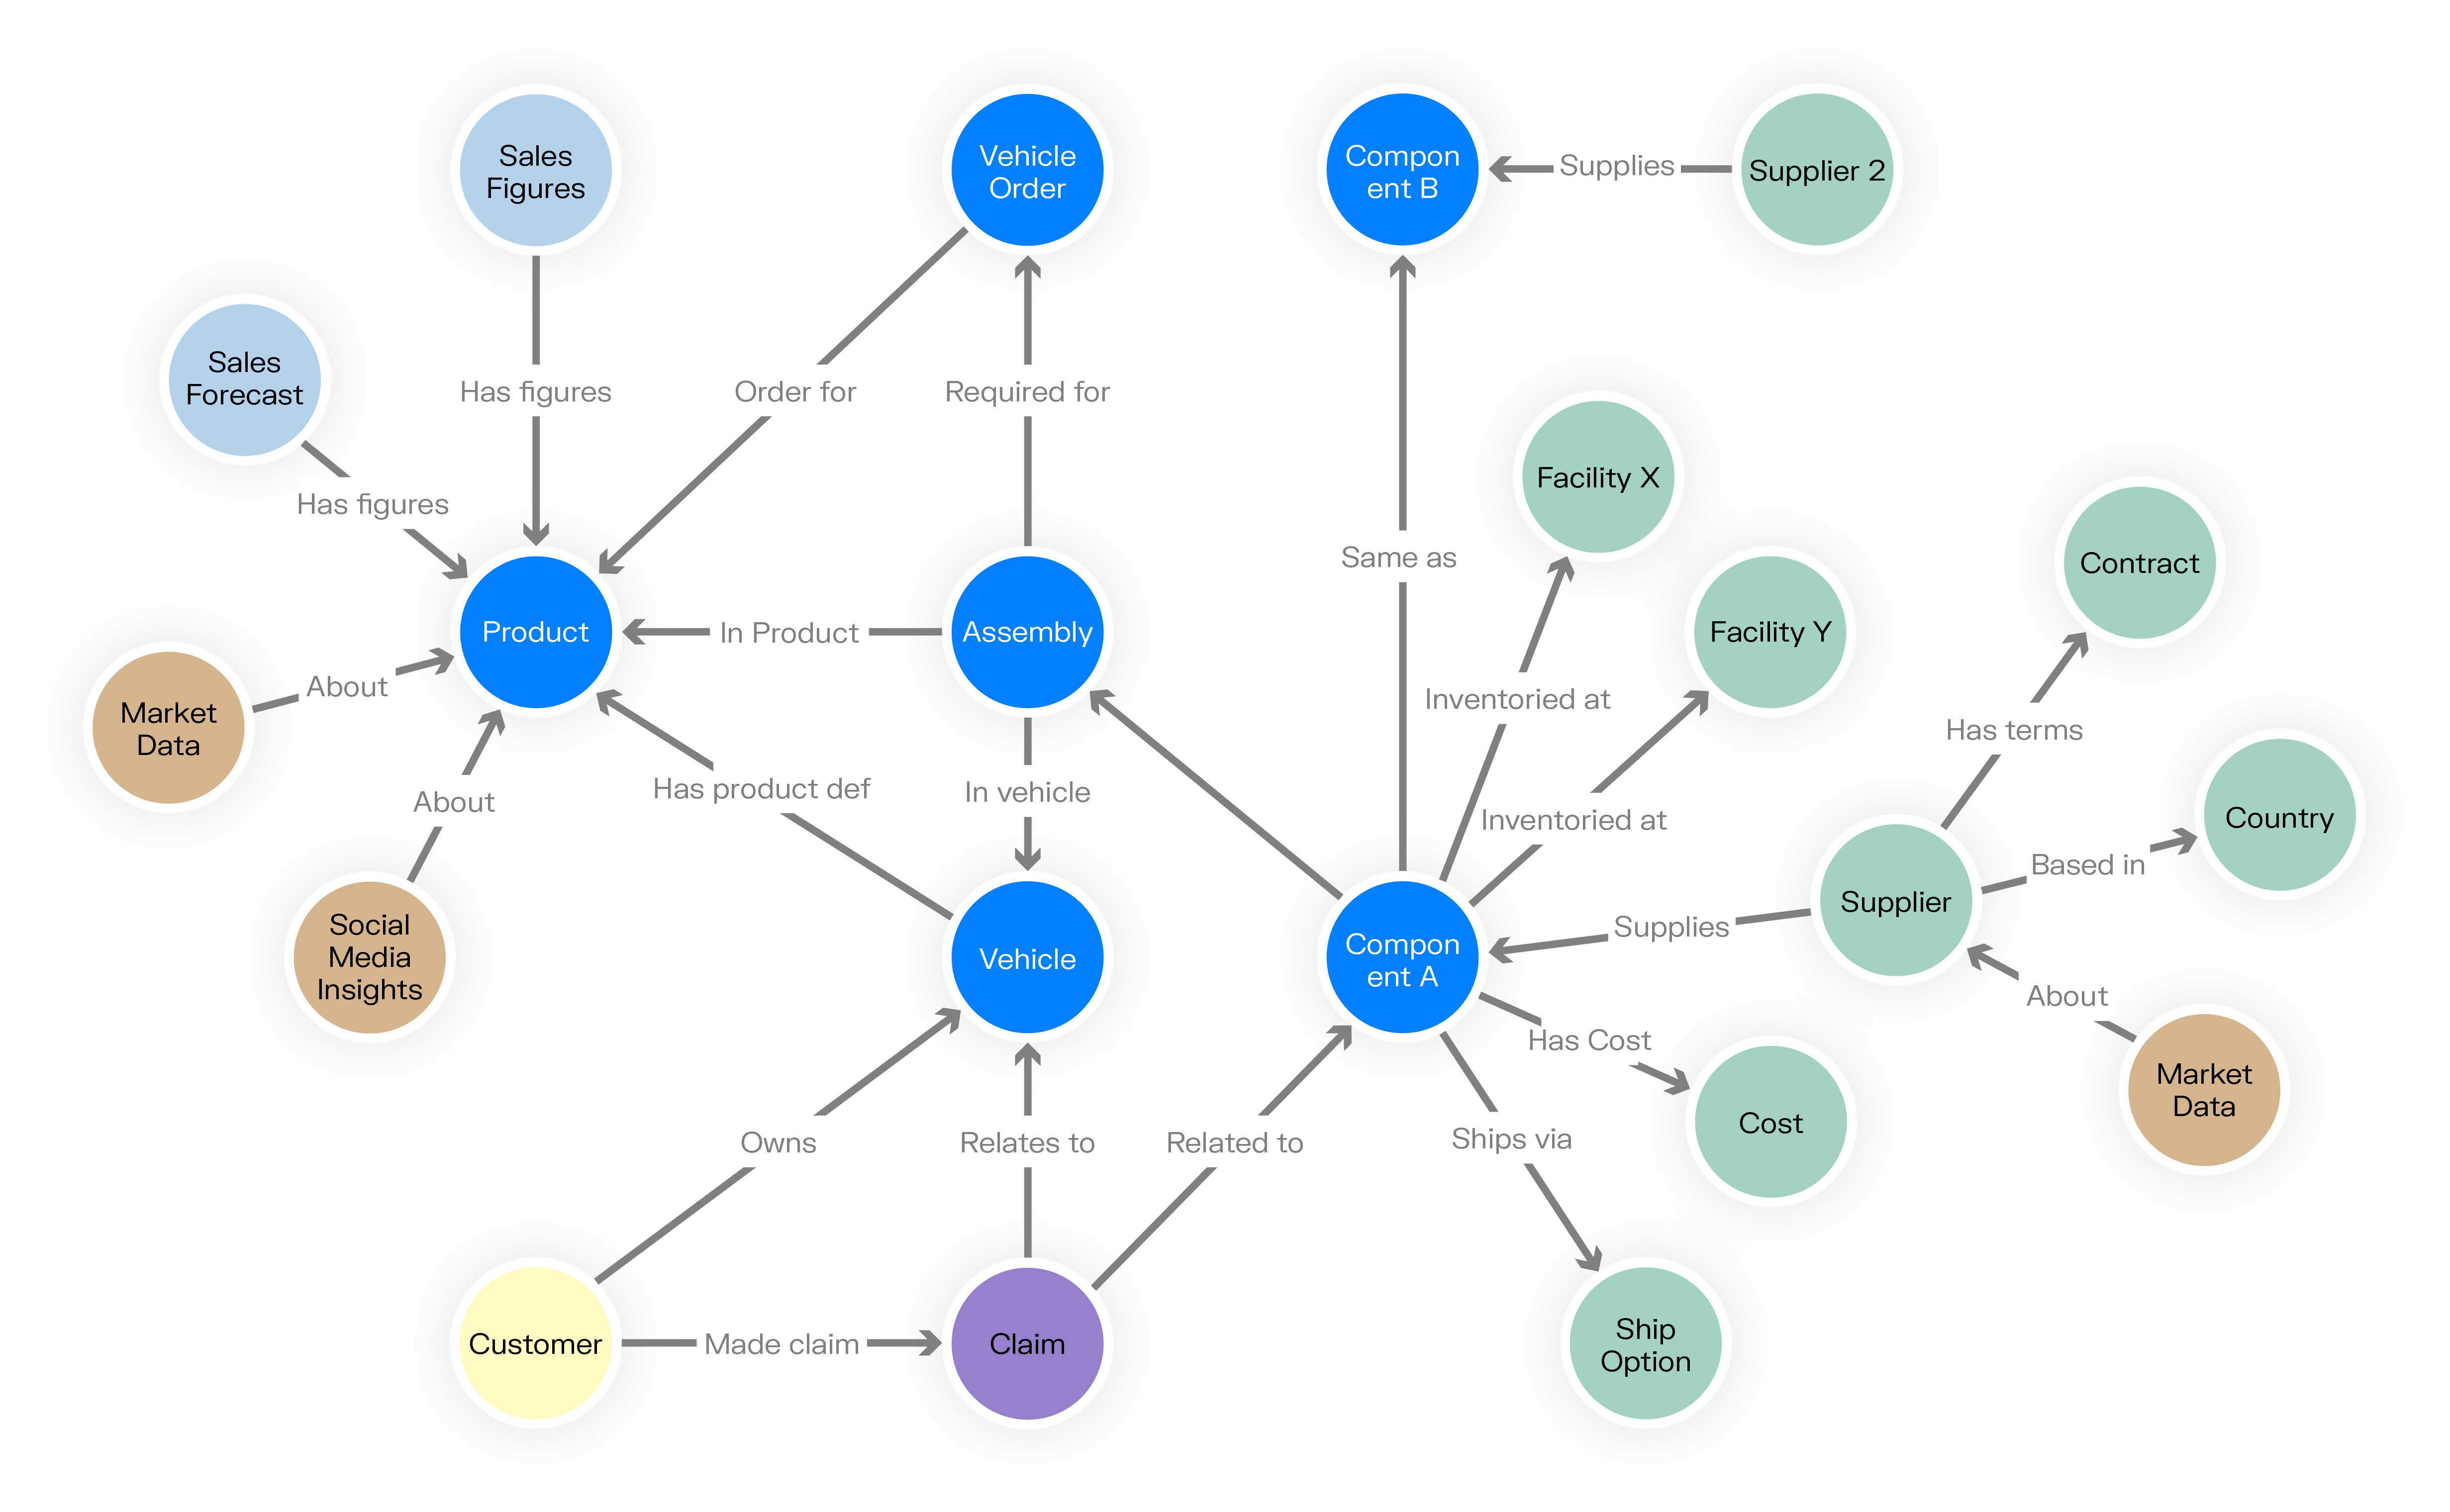 visualizing supply chain dependencies as a graph